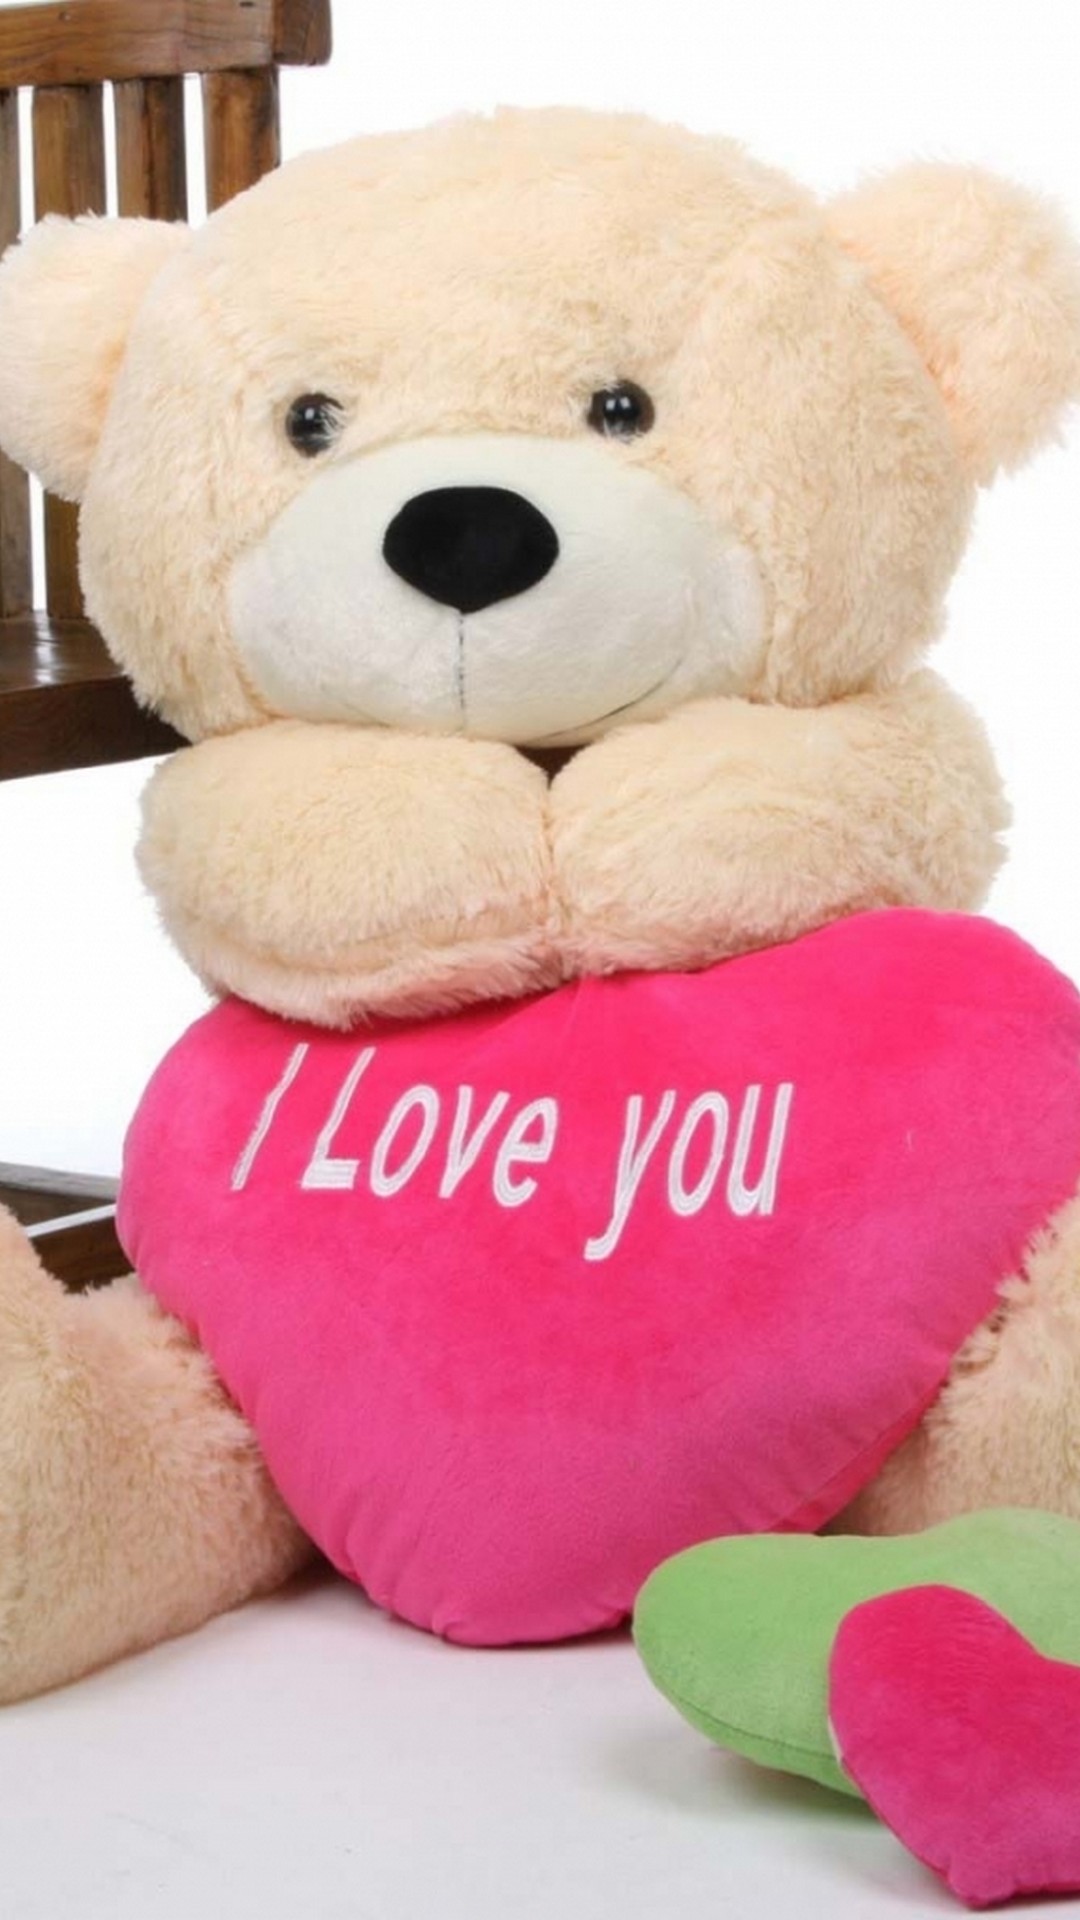 Teddy Bear Wallpaper For Android With Image Resolution - Love You Teddy  Bear - 1080x1920 Wallpaper 